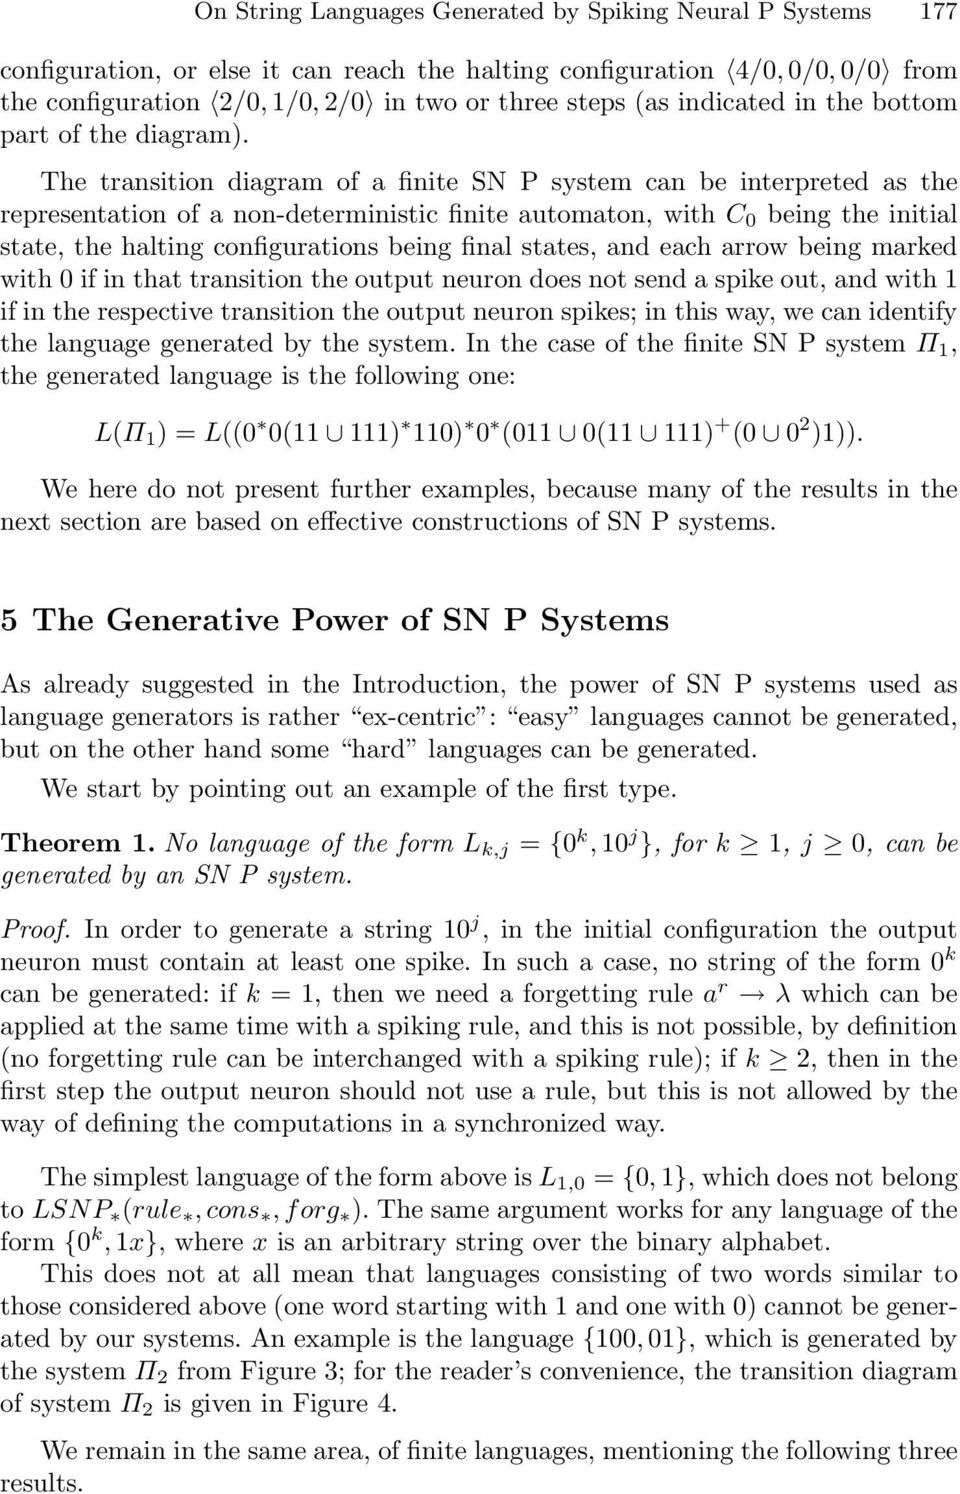 The transition diagram of a finite SN P system can be interpreted as the representation of a non-deterministic finite automaton, with C 0 being the initial state, the halting configurations being